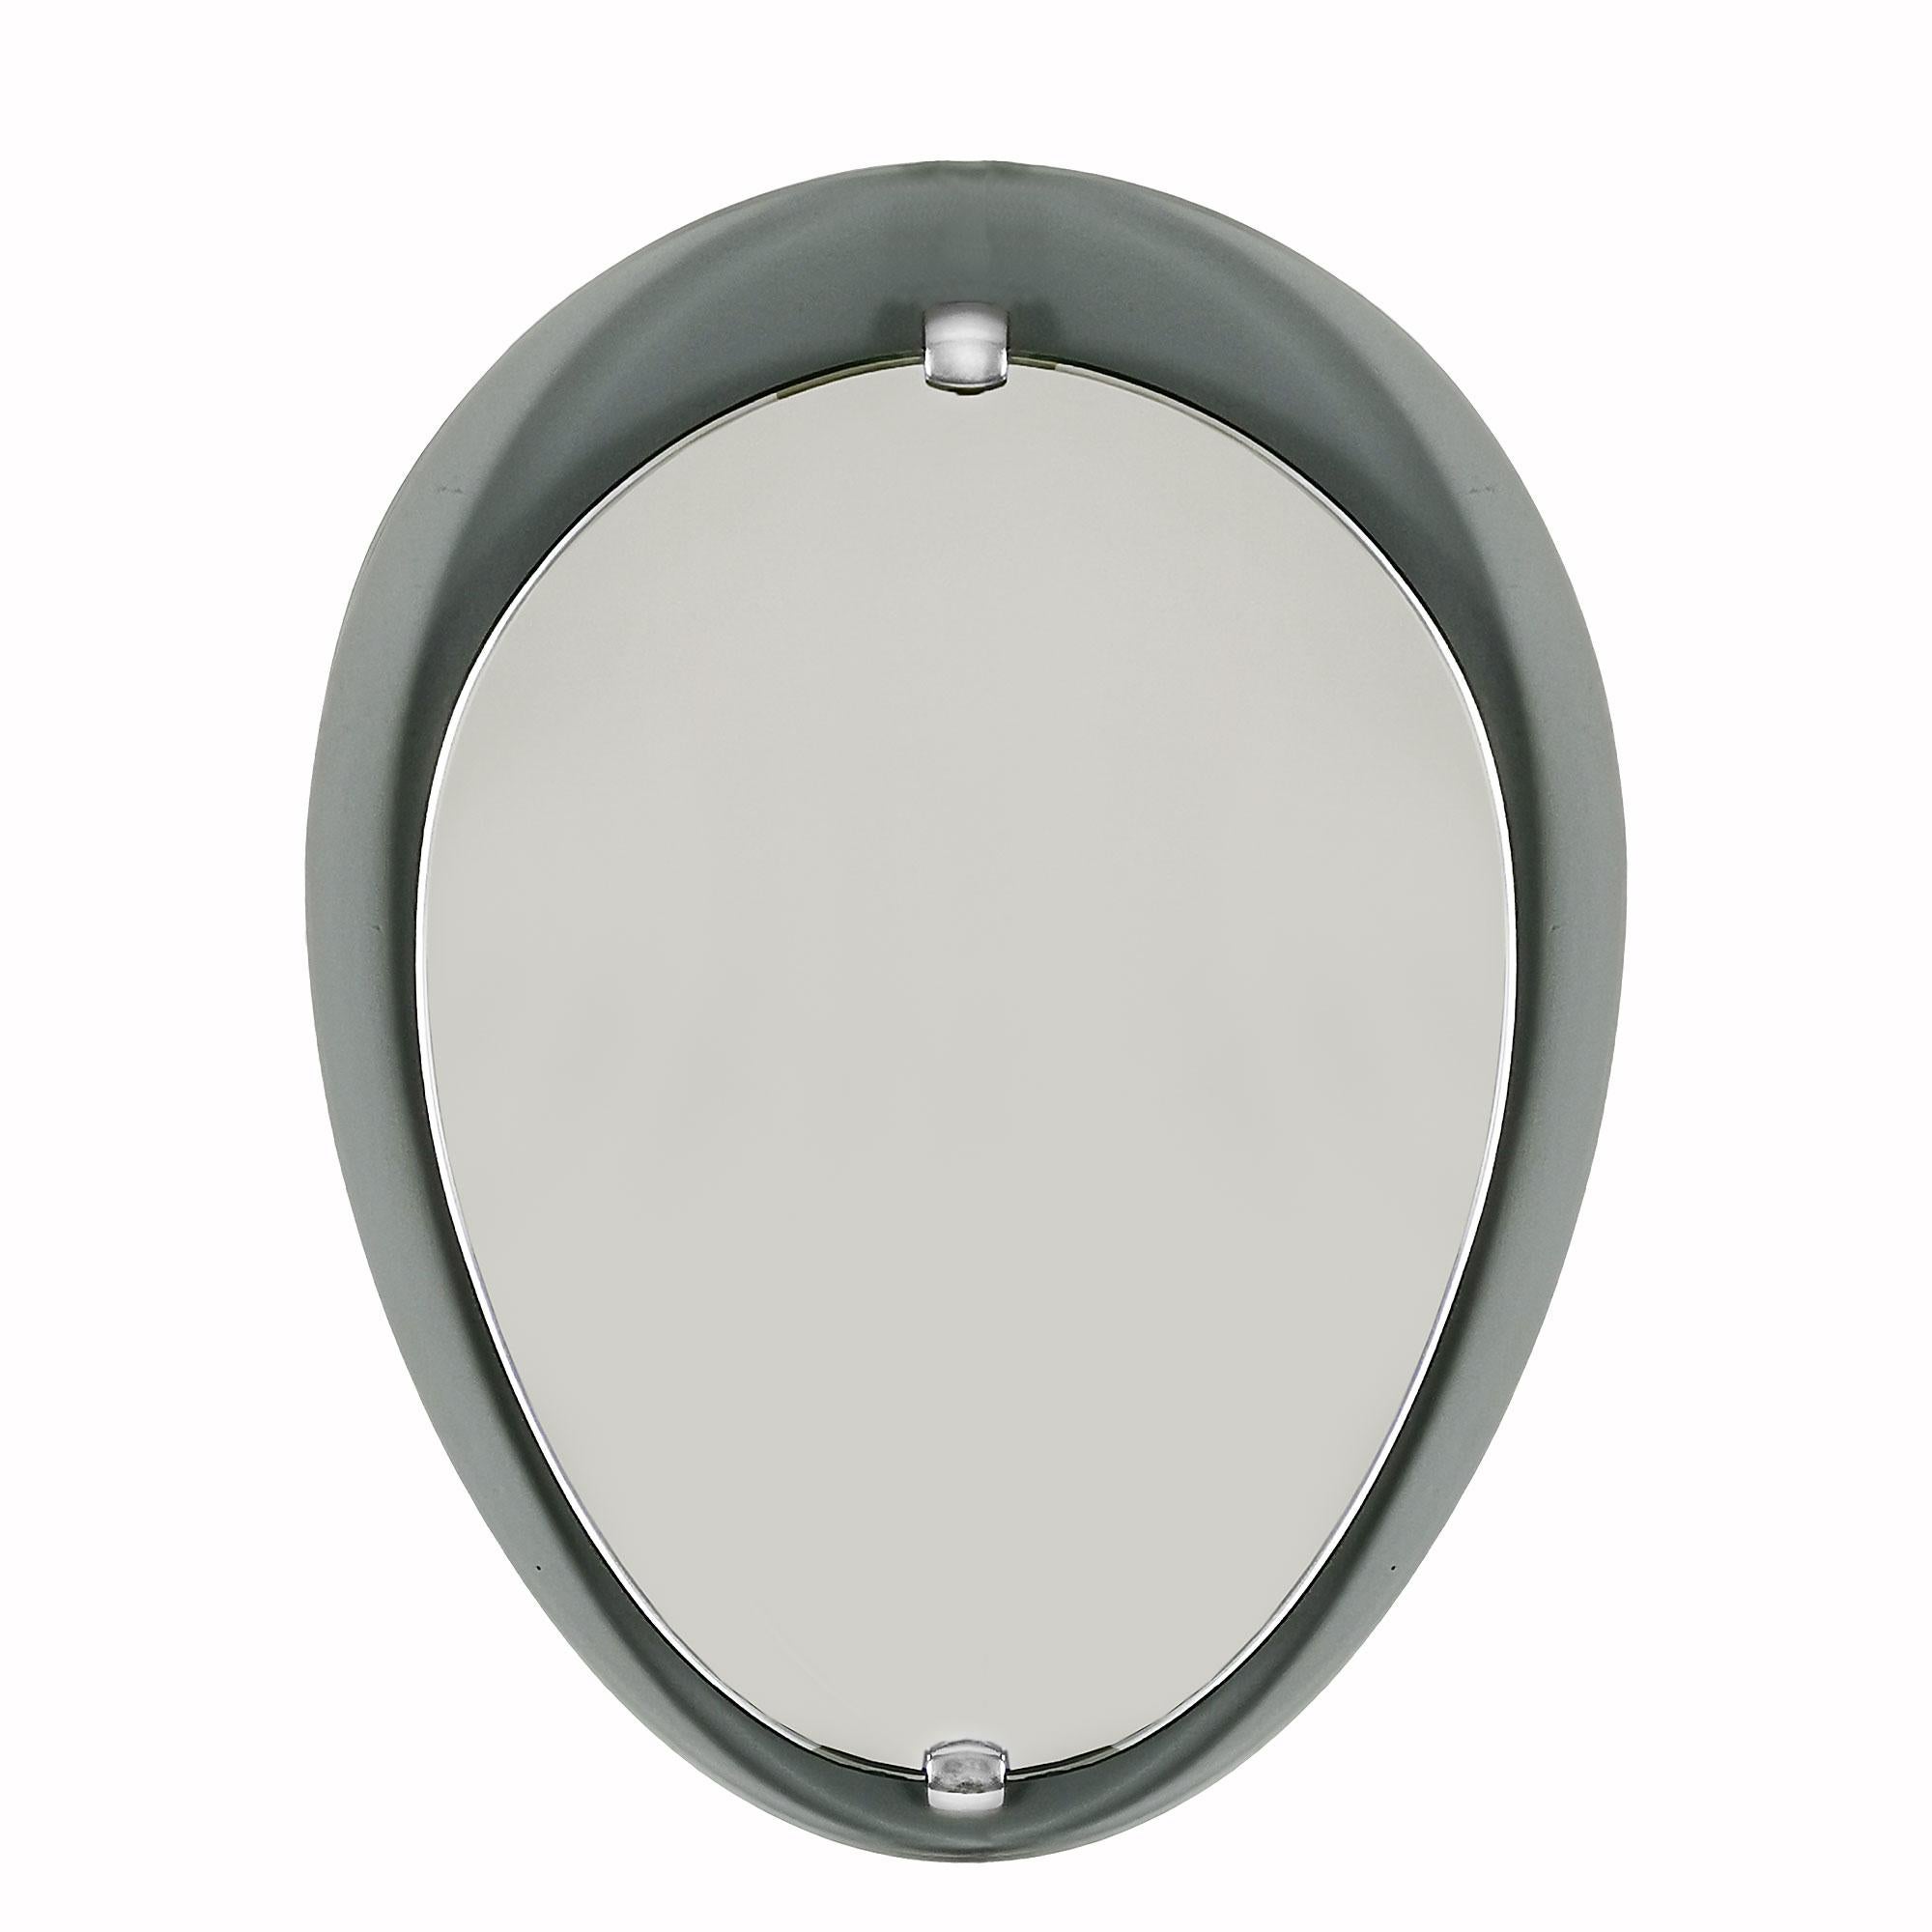 Oval mirror with a beveled and thick smoked gray glass back, over it a beveled mirror fixed by polished aluminum decoration.

Italy c. 1960.